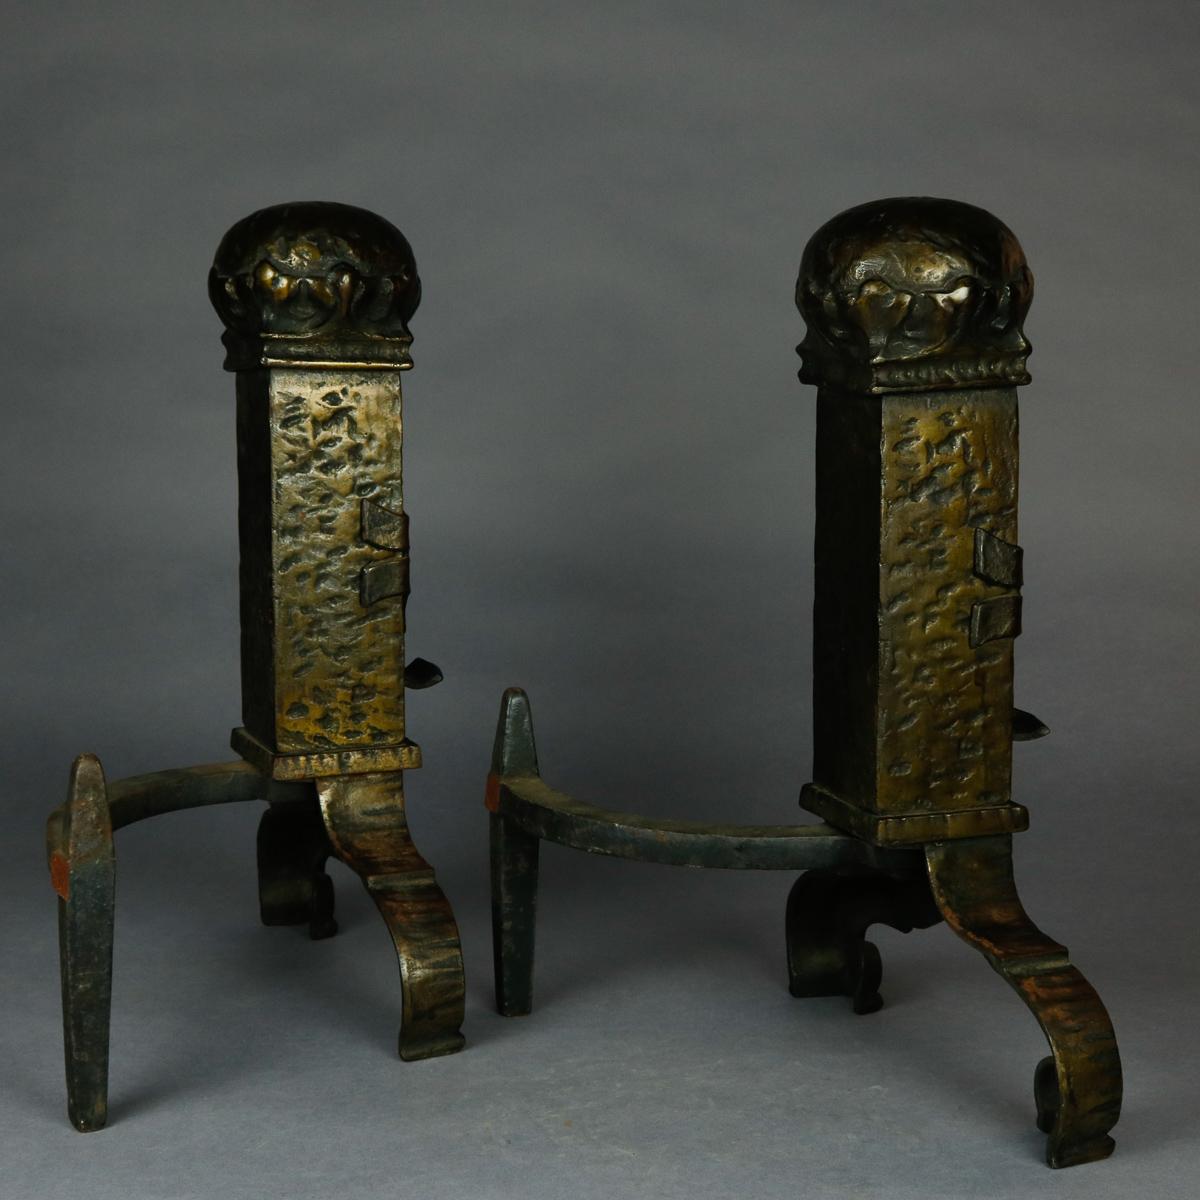 A set of antique Gothic Bradley and Hubbard School brass fireplace andirons offer hammered brass in tower form with central shield and oversized ball finial raised on scroll form feet, without firedogs, 19th century

***DELIVERY NOTICE – Due to